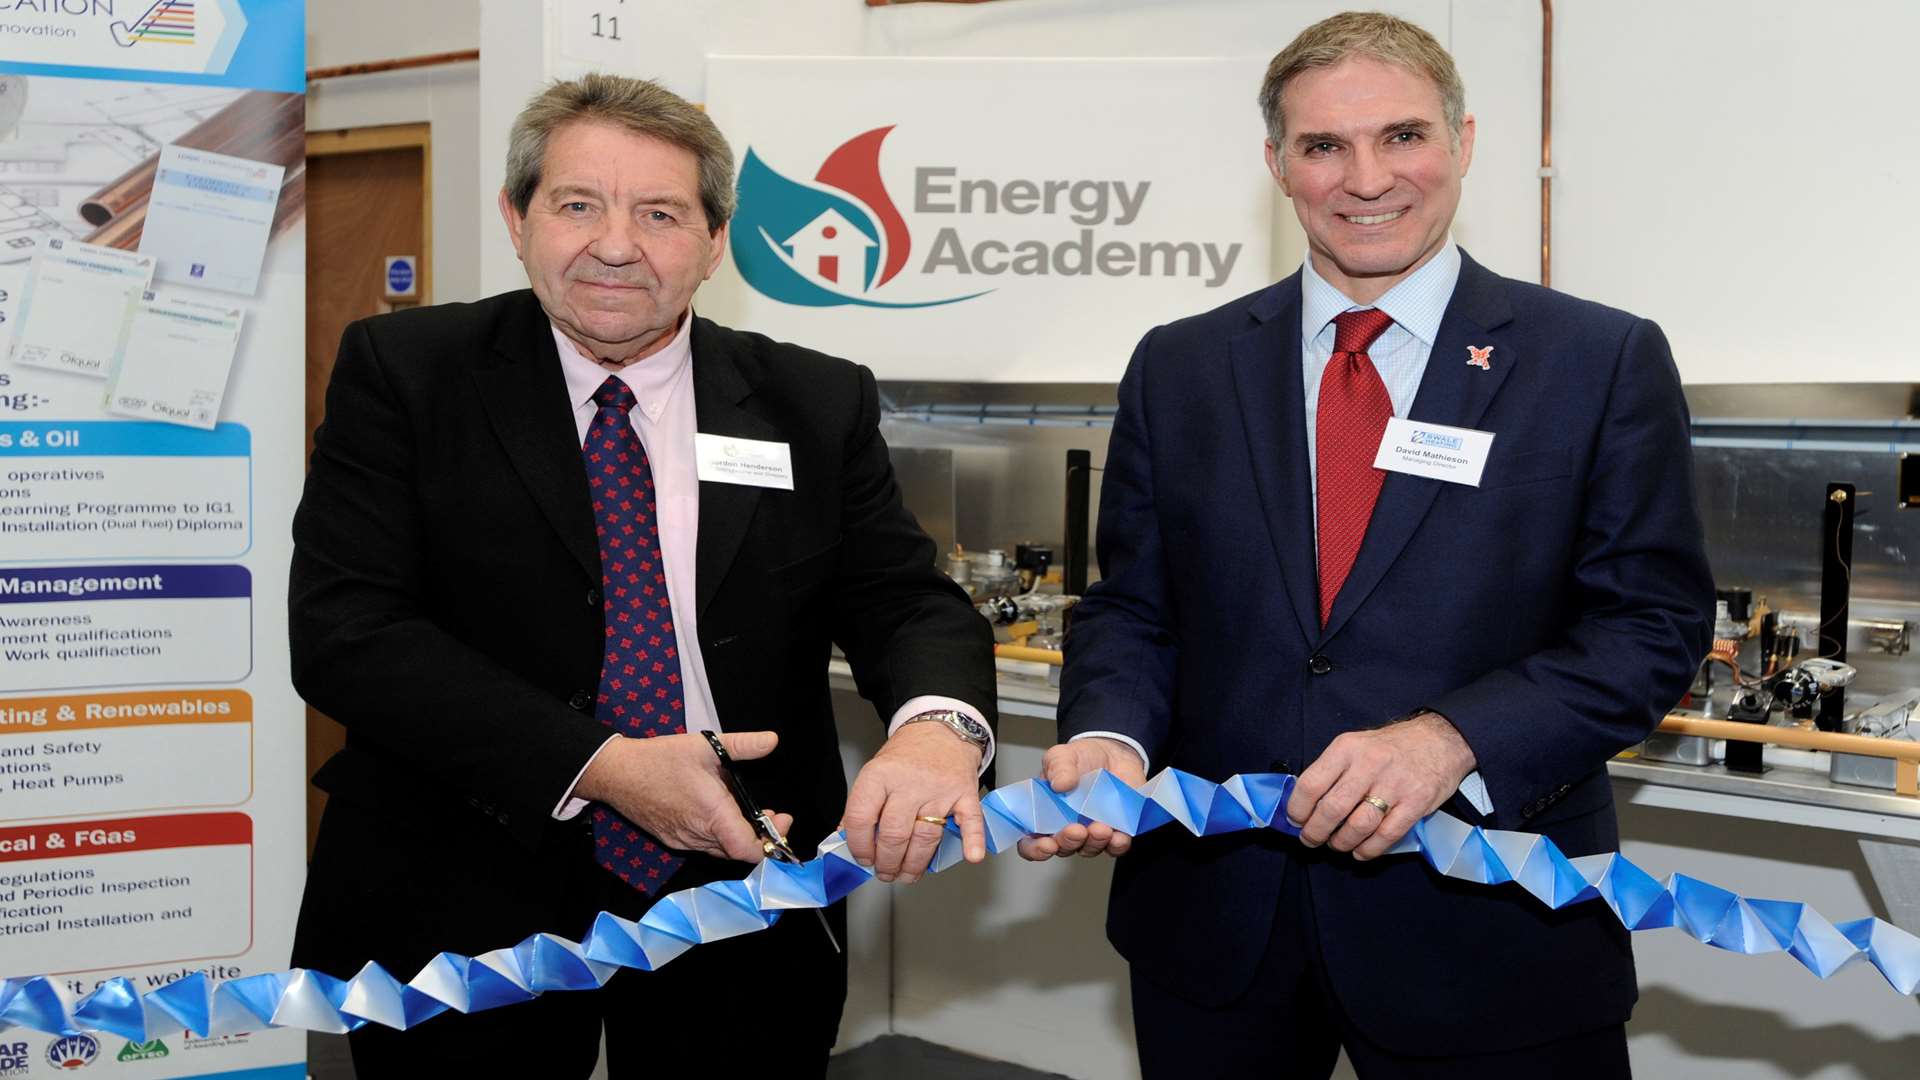 Gordon Henderson MP, left, opens the Energy Academy with Swale Heating managing director David Mathieson